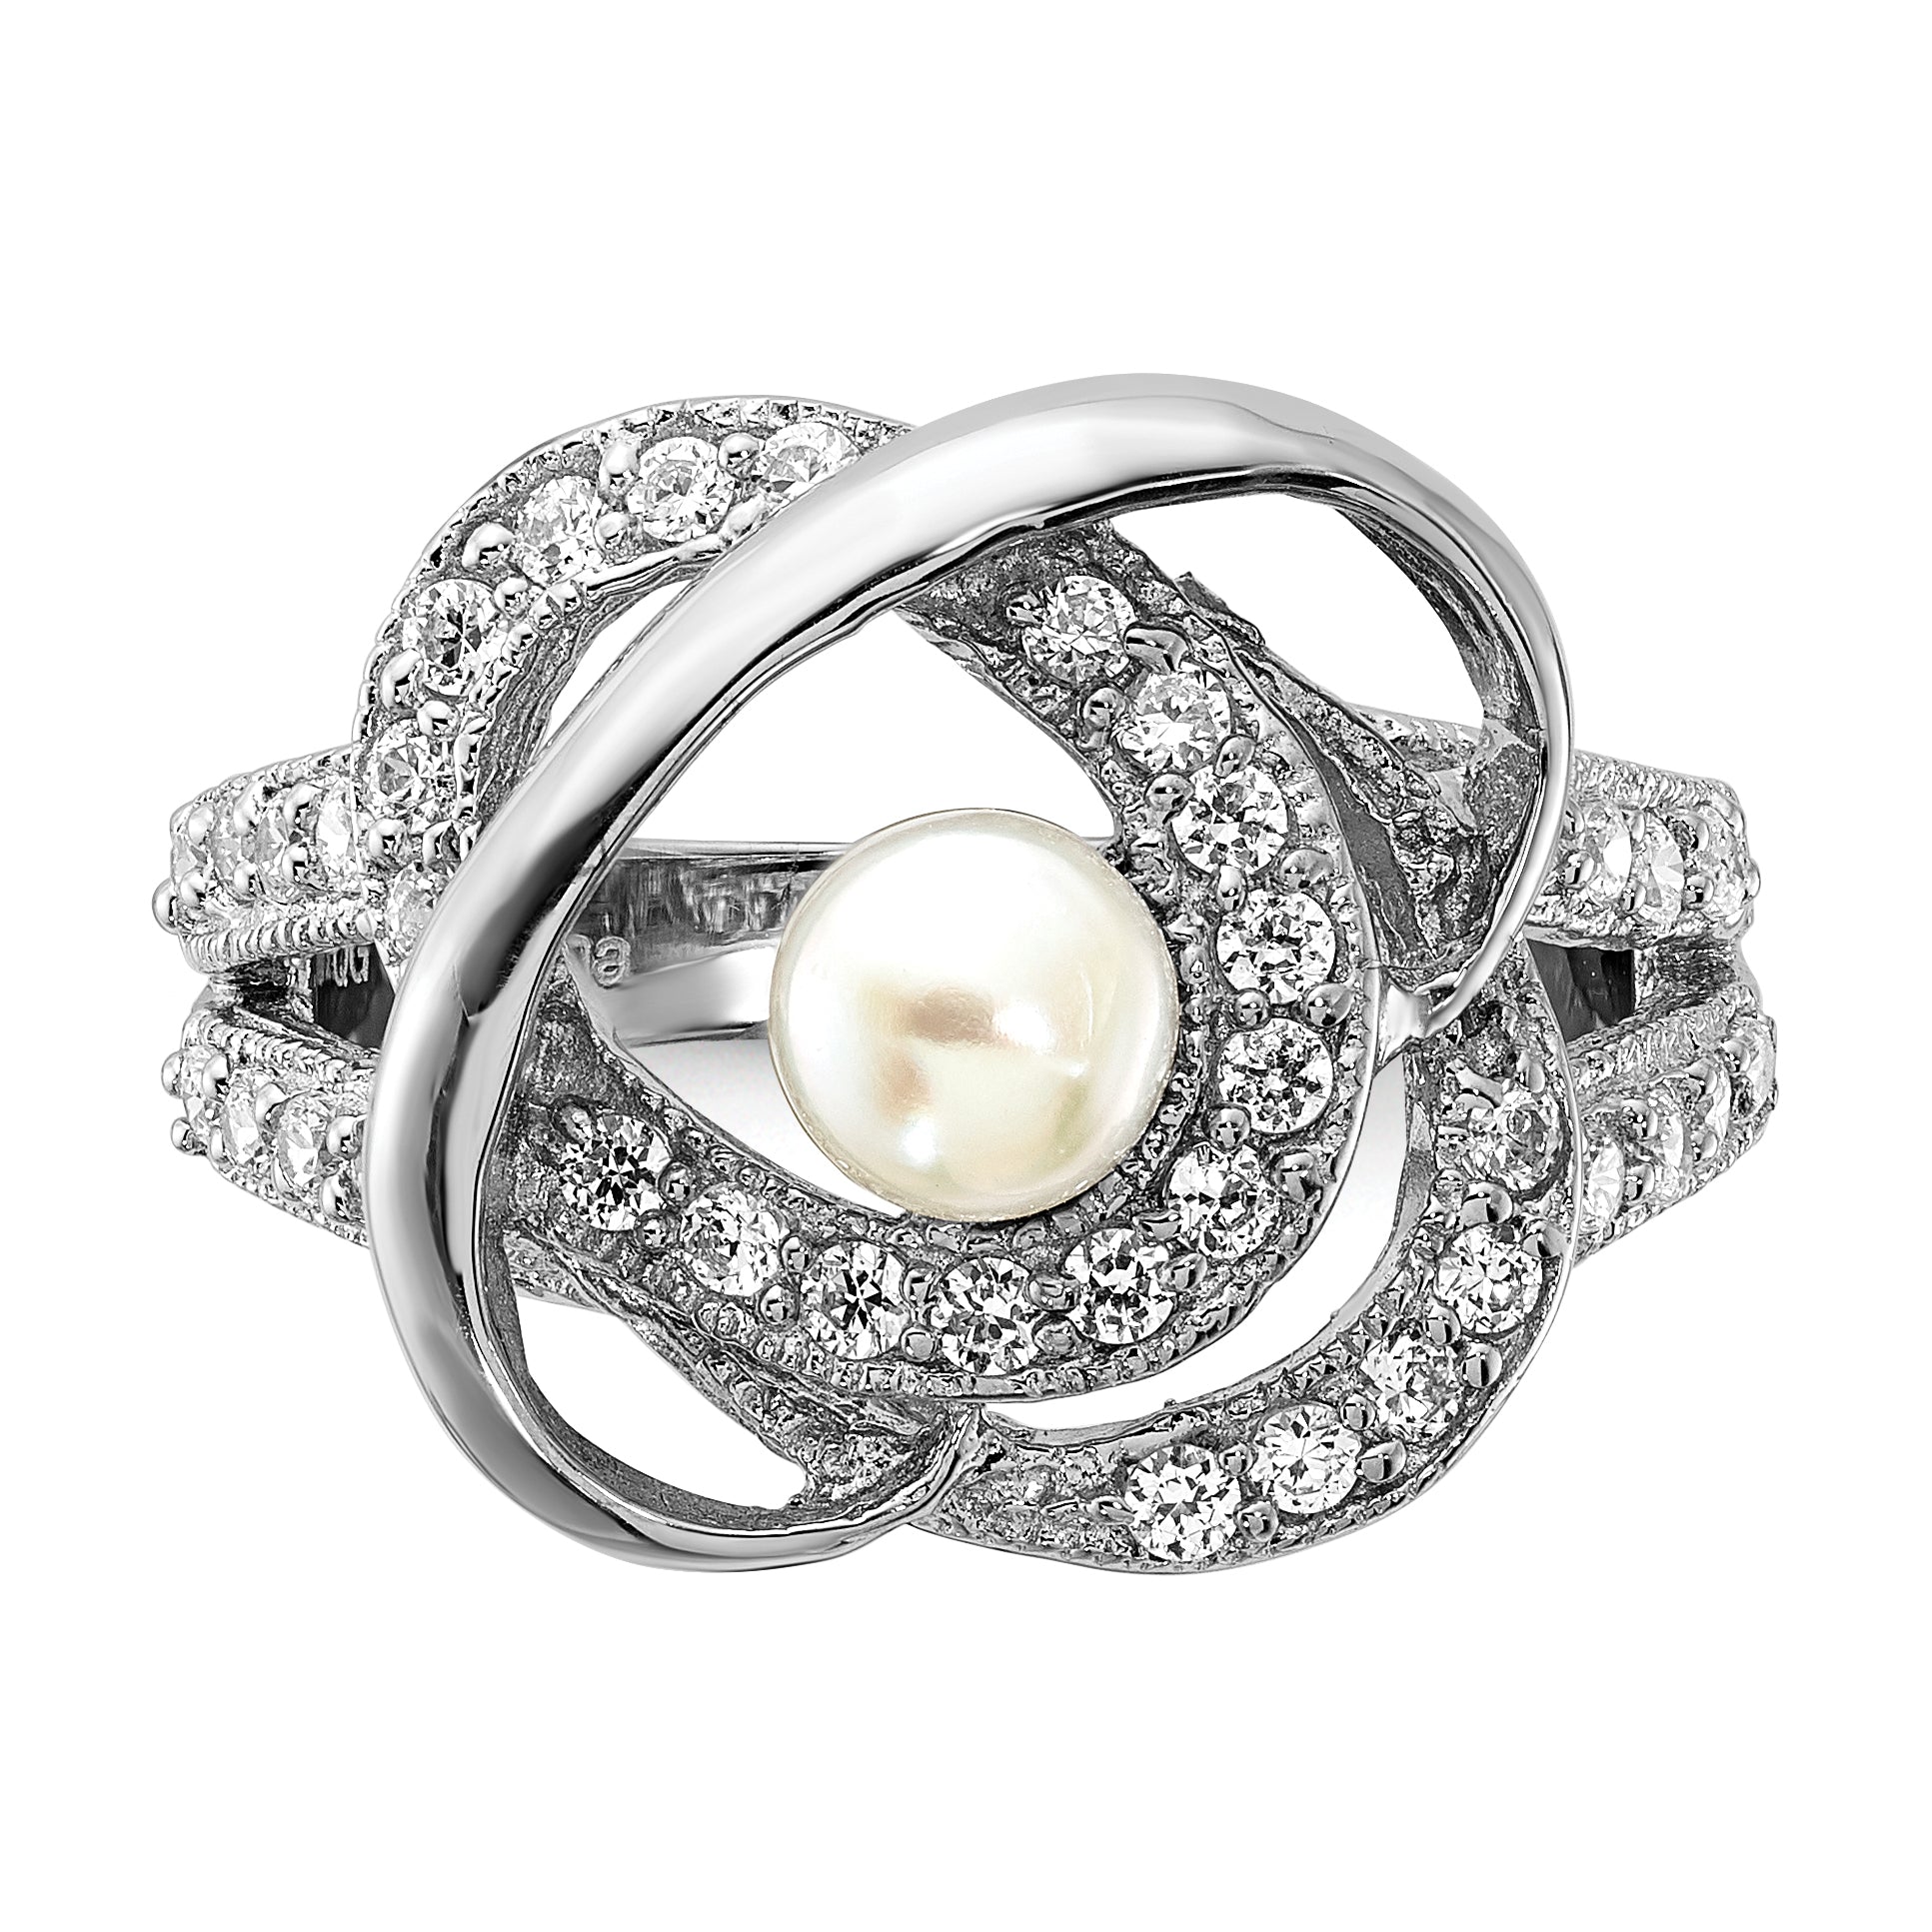 Sterling Silver Polished Simulated Pearl and CZ Ring